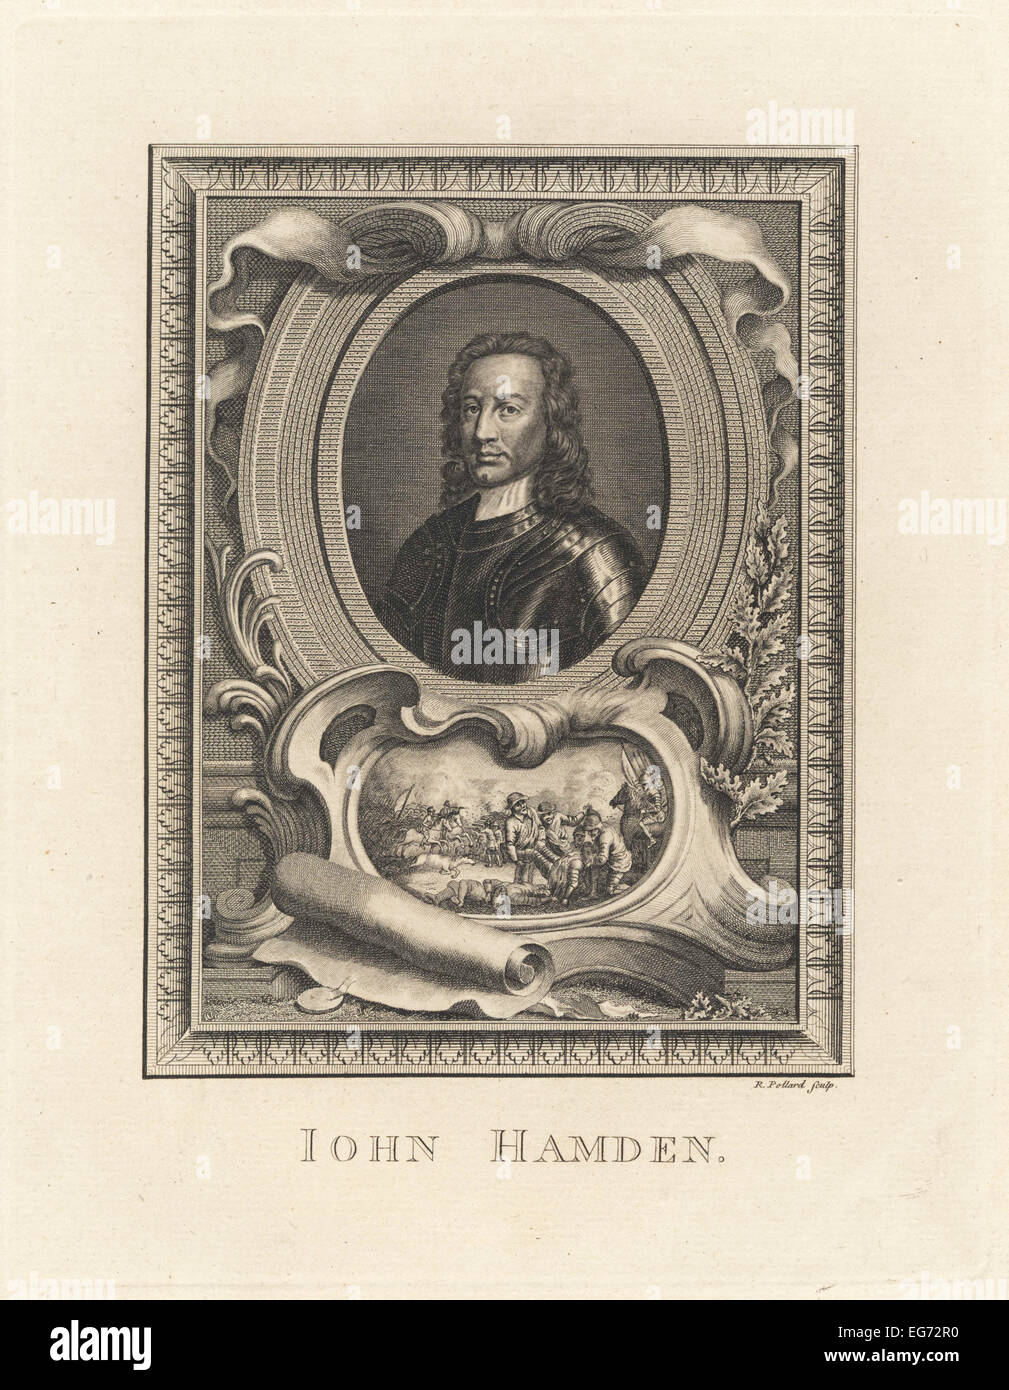 John Hampden, English Parliamentarian, in oval above vignette of his death at the Battle of Chalgrove Field. Stock Photo